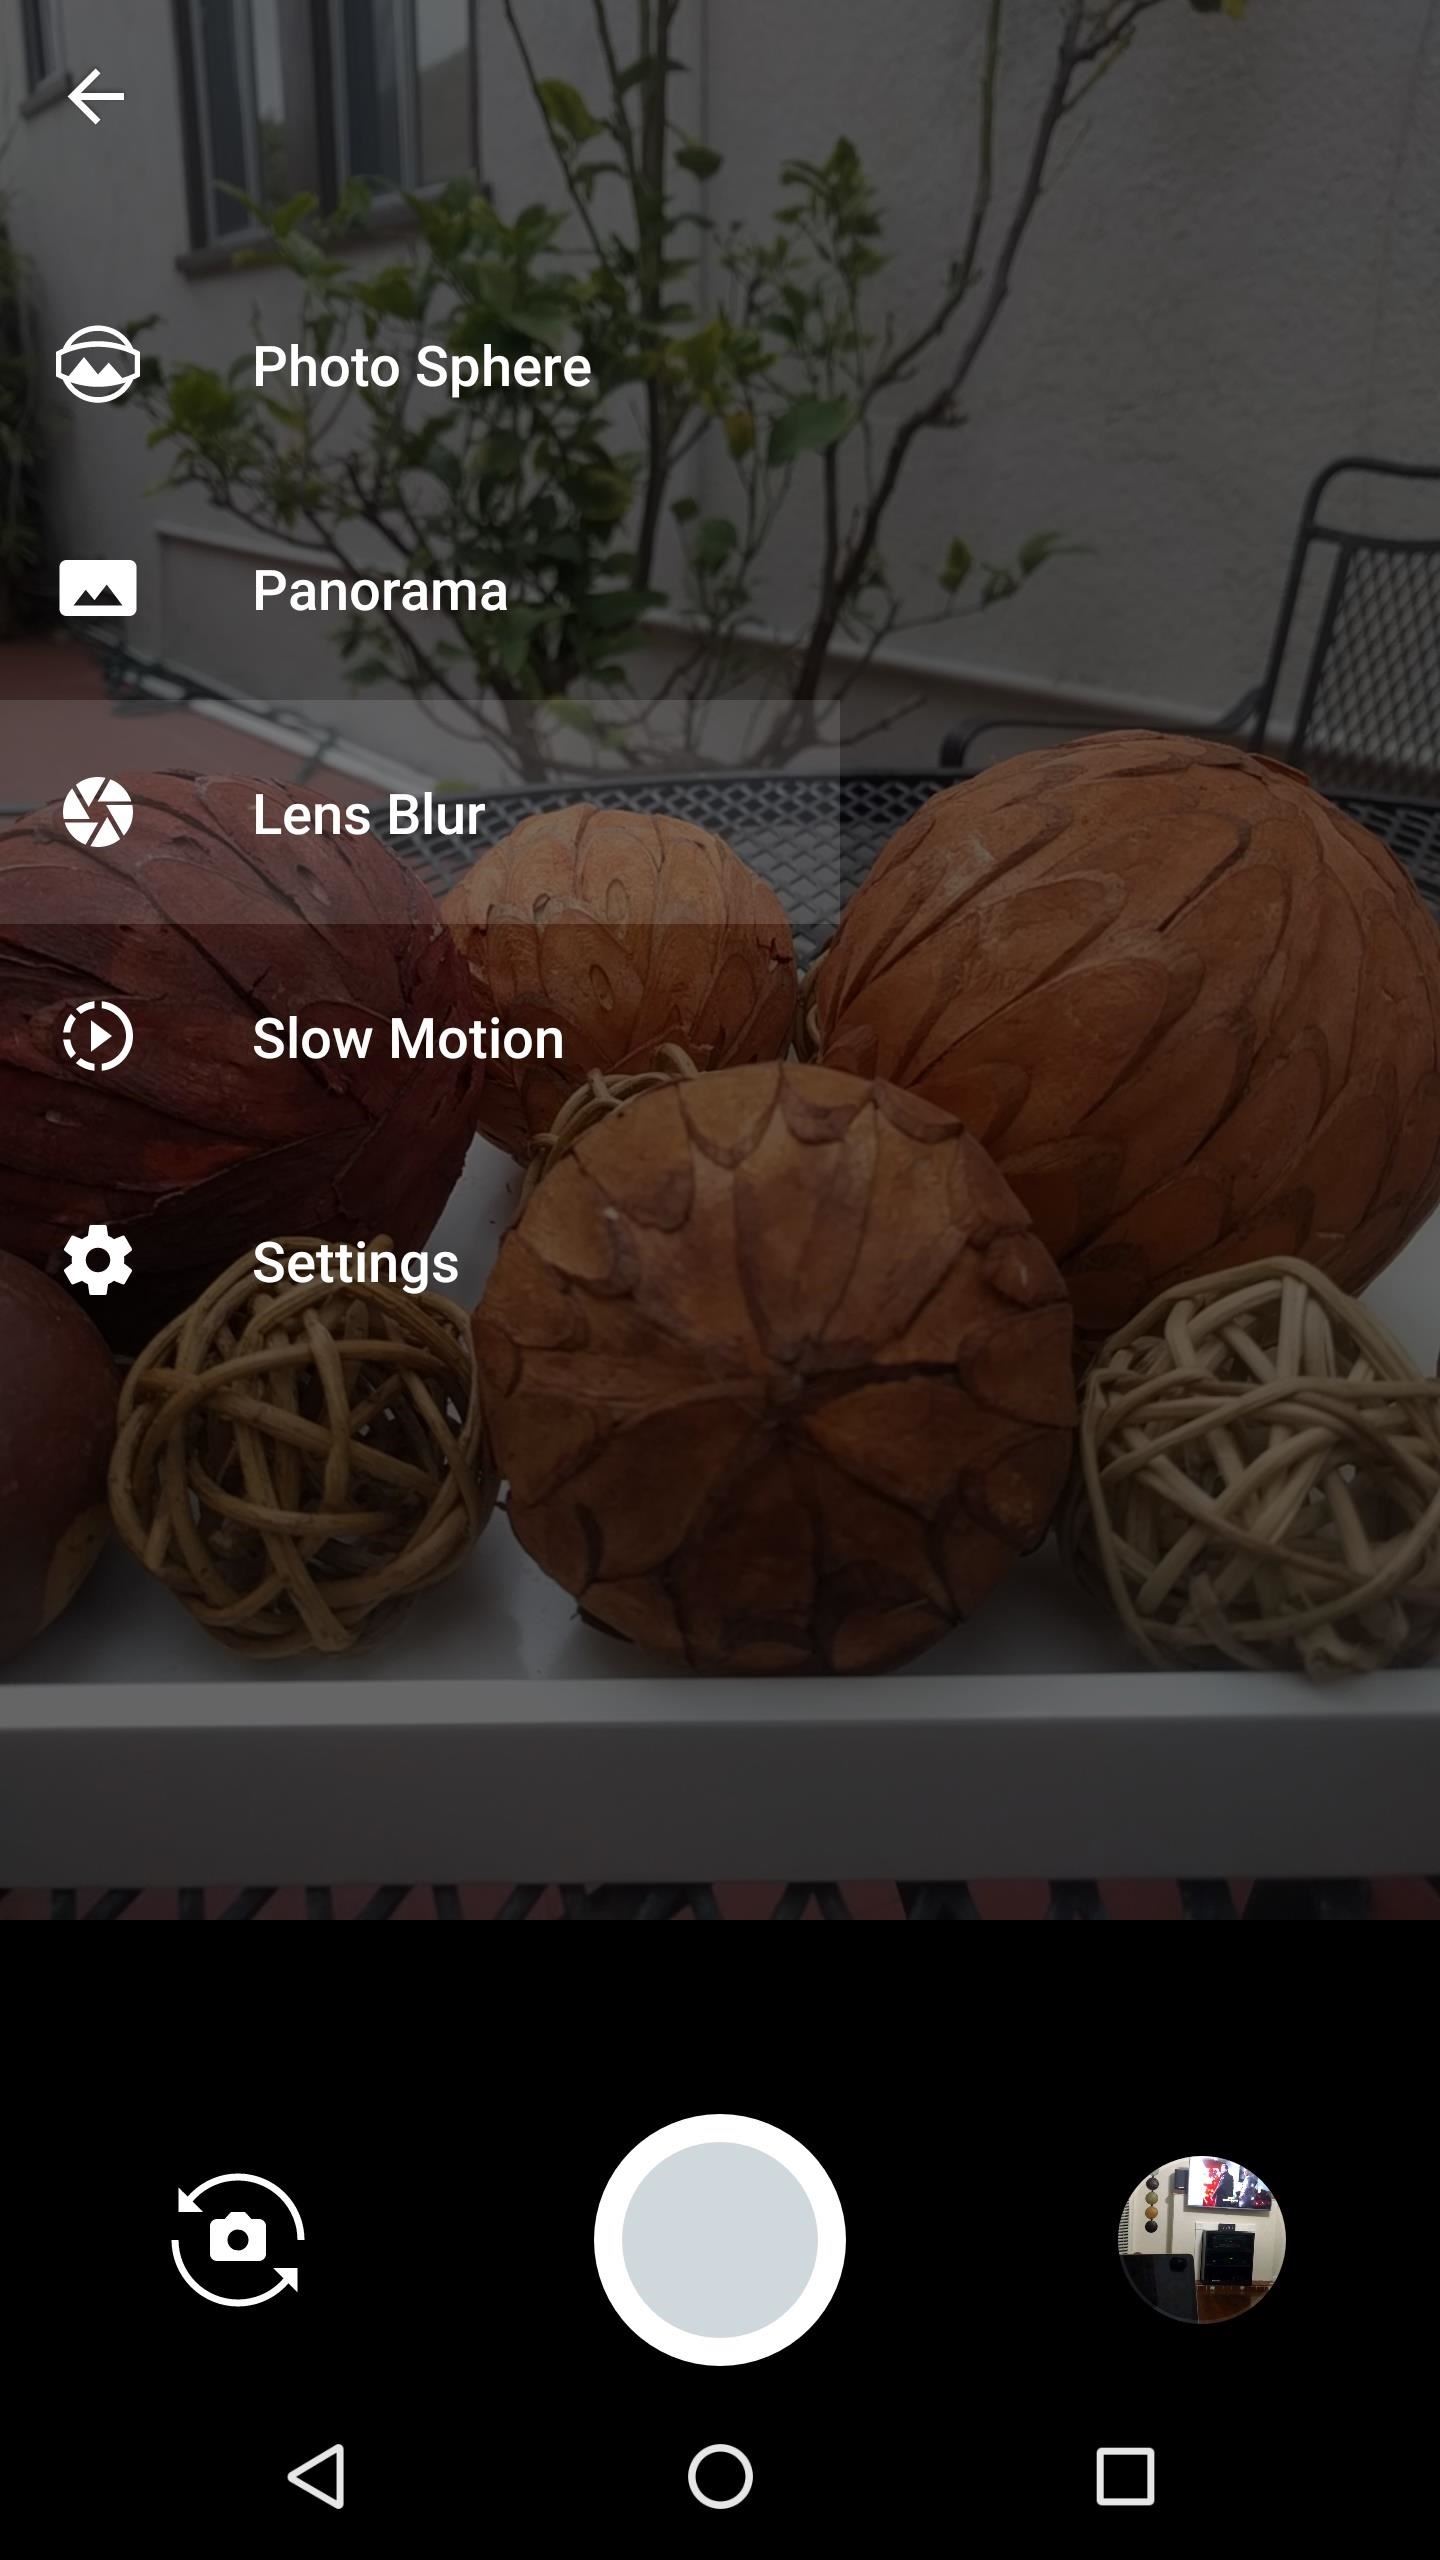 How to Take 'Portrait Mode' Pictures on Android Like on the iPhone 7 Plus